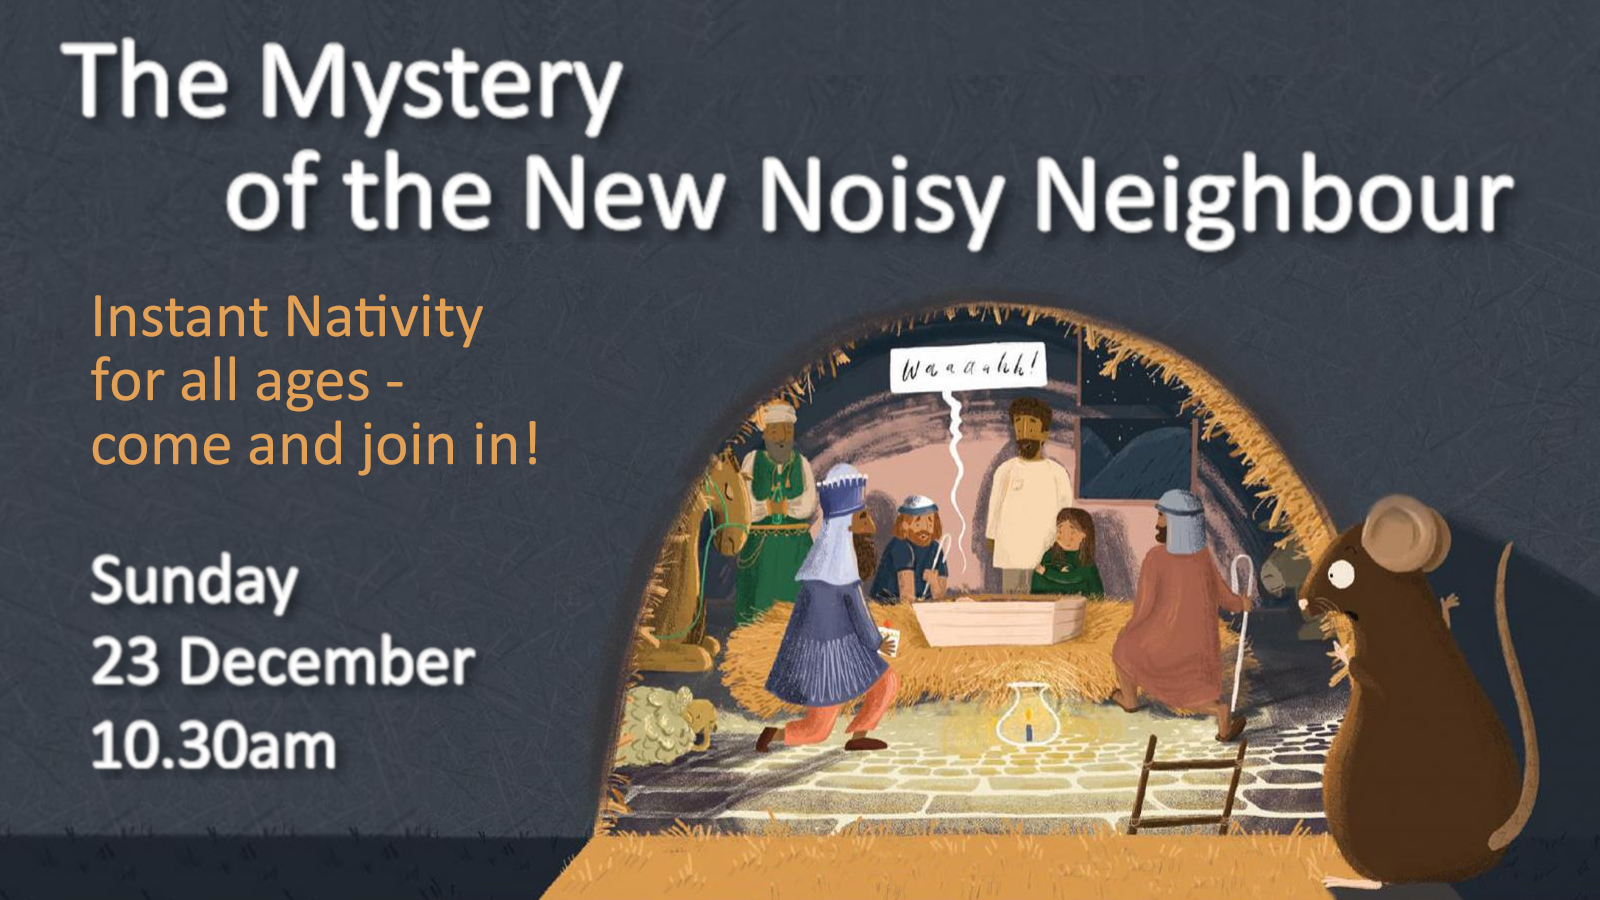 The Mystery of the New Noisy Neighbour